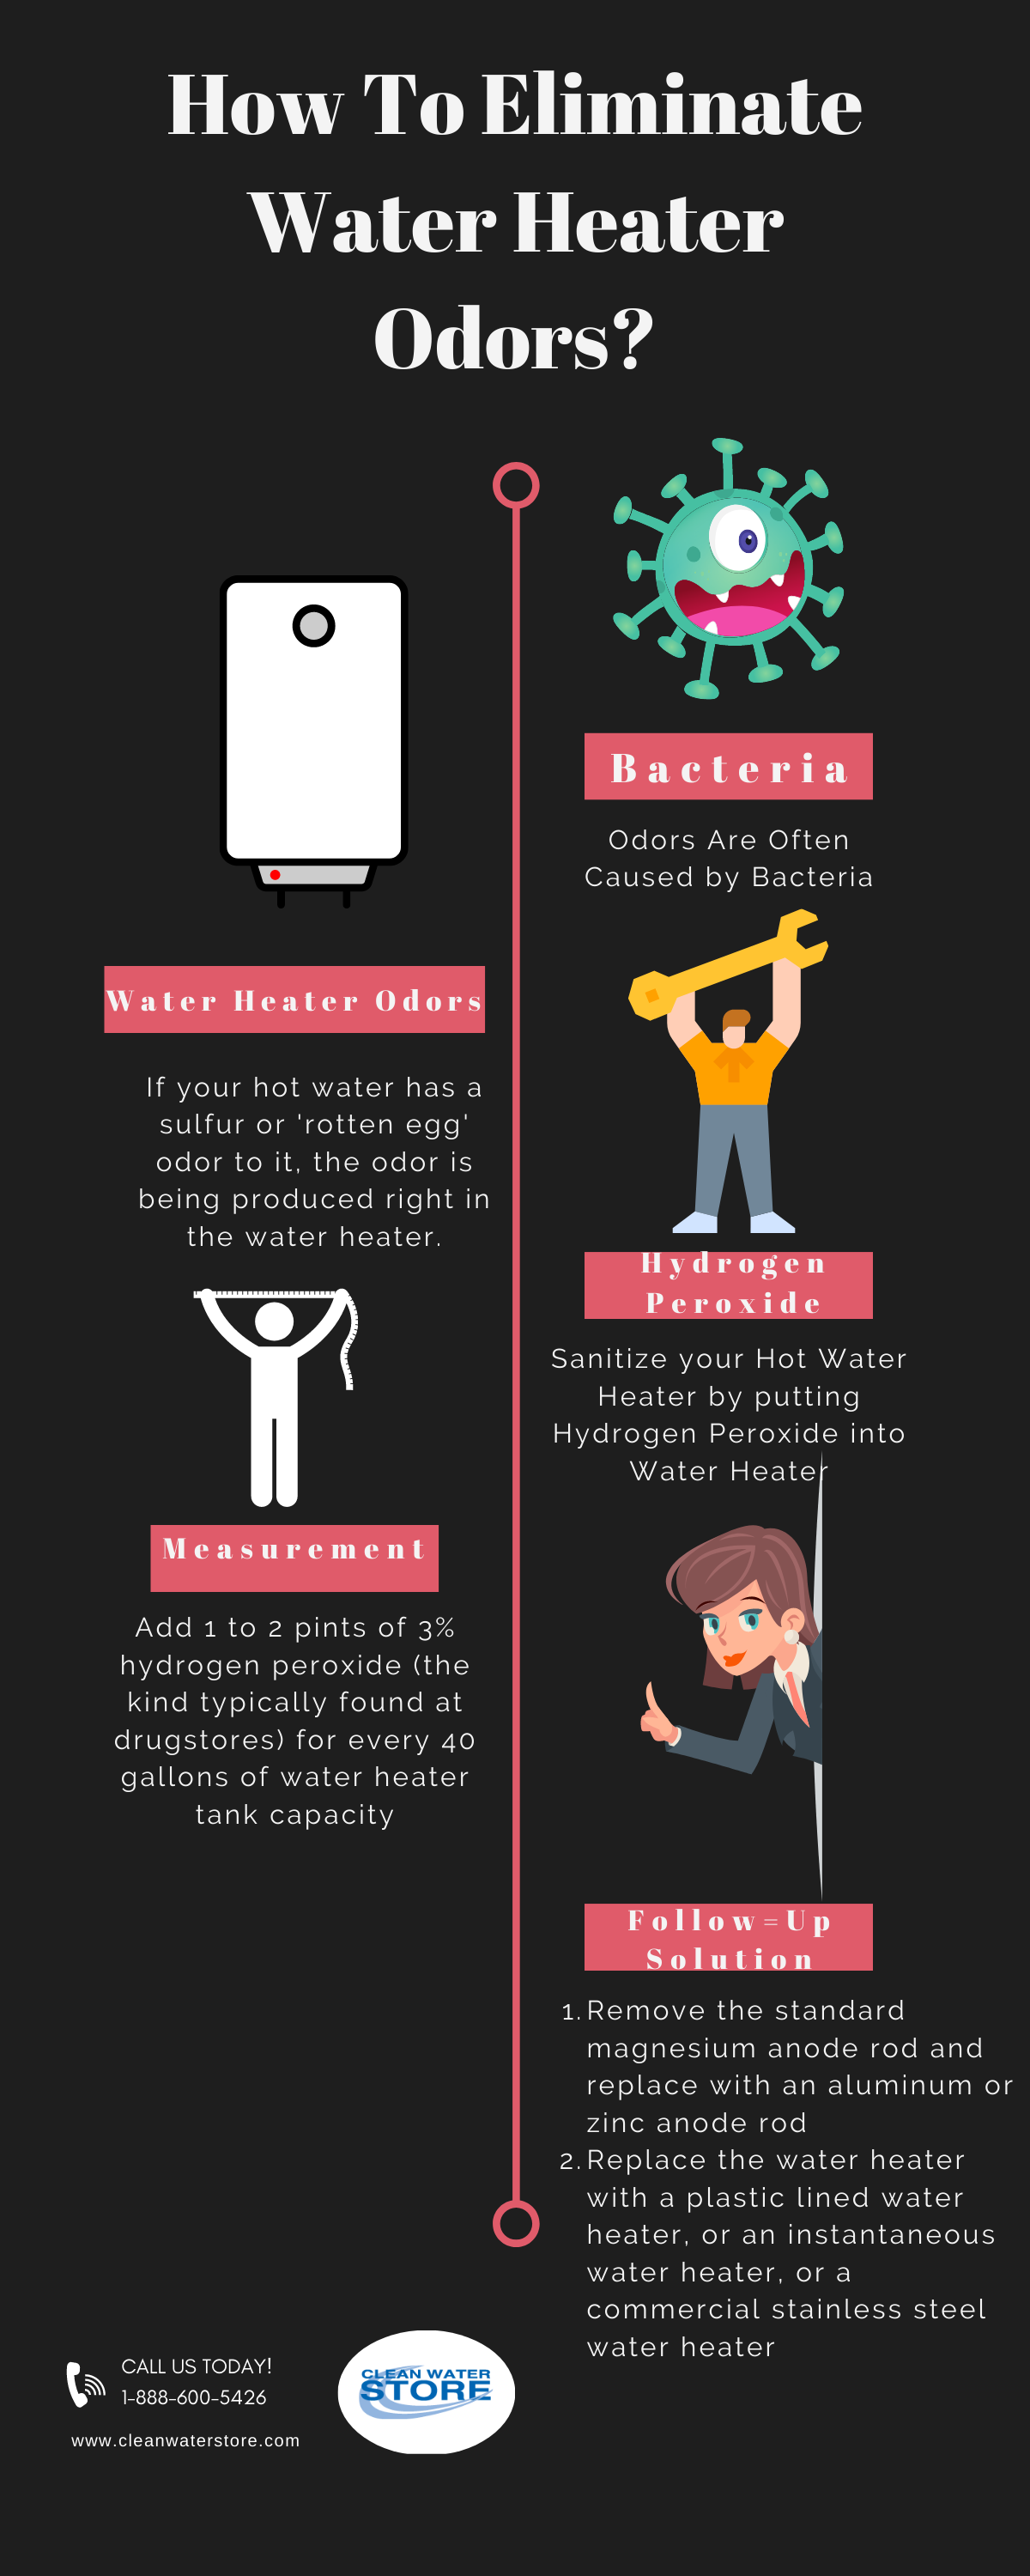 How To Eliminate Water Heater Odors